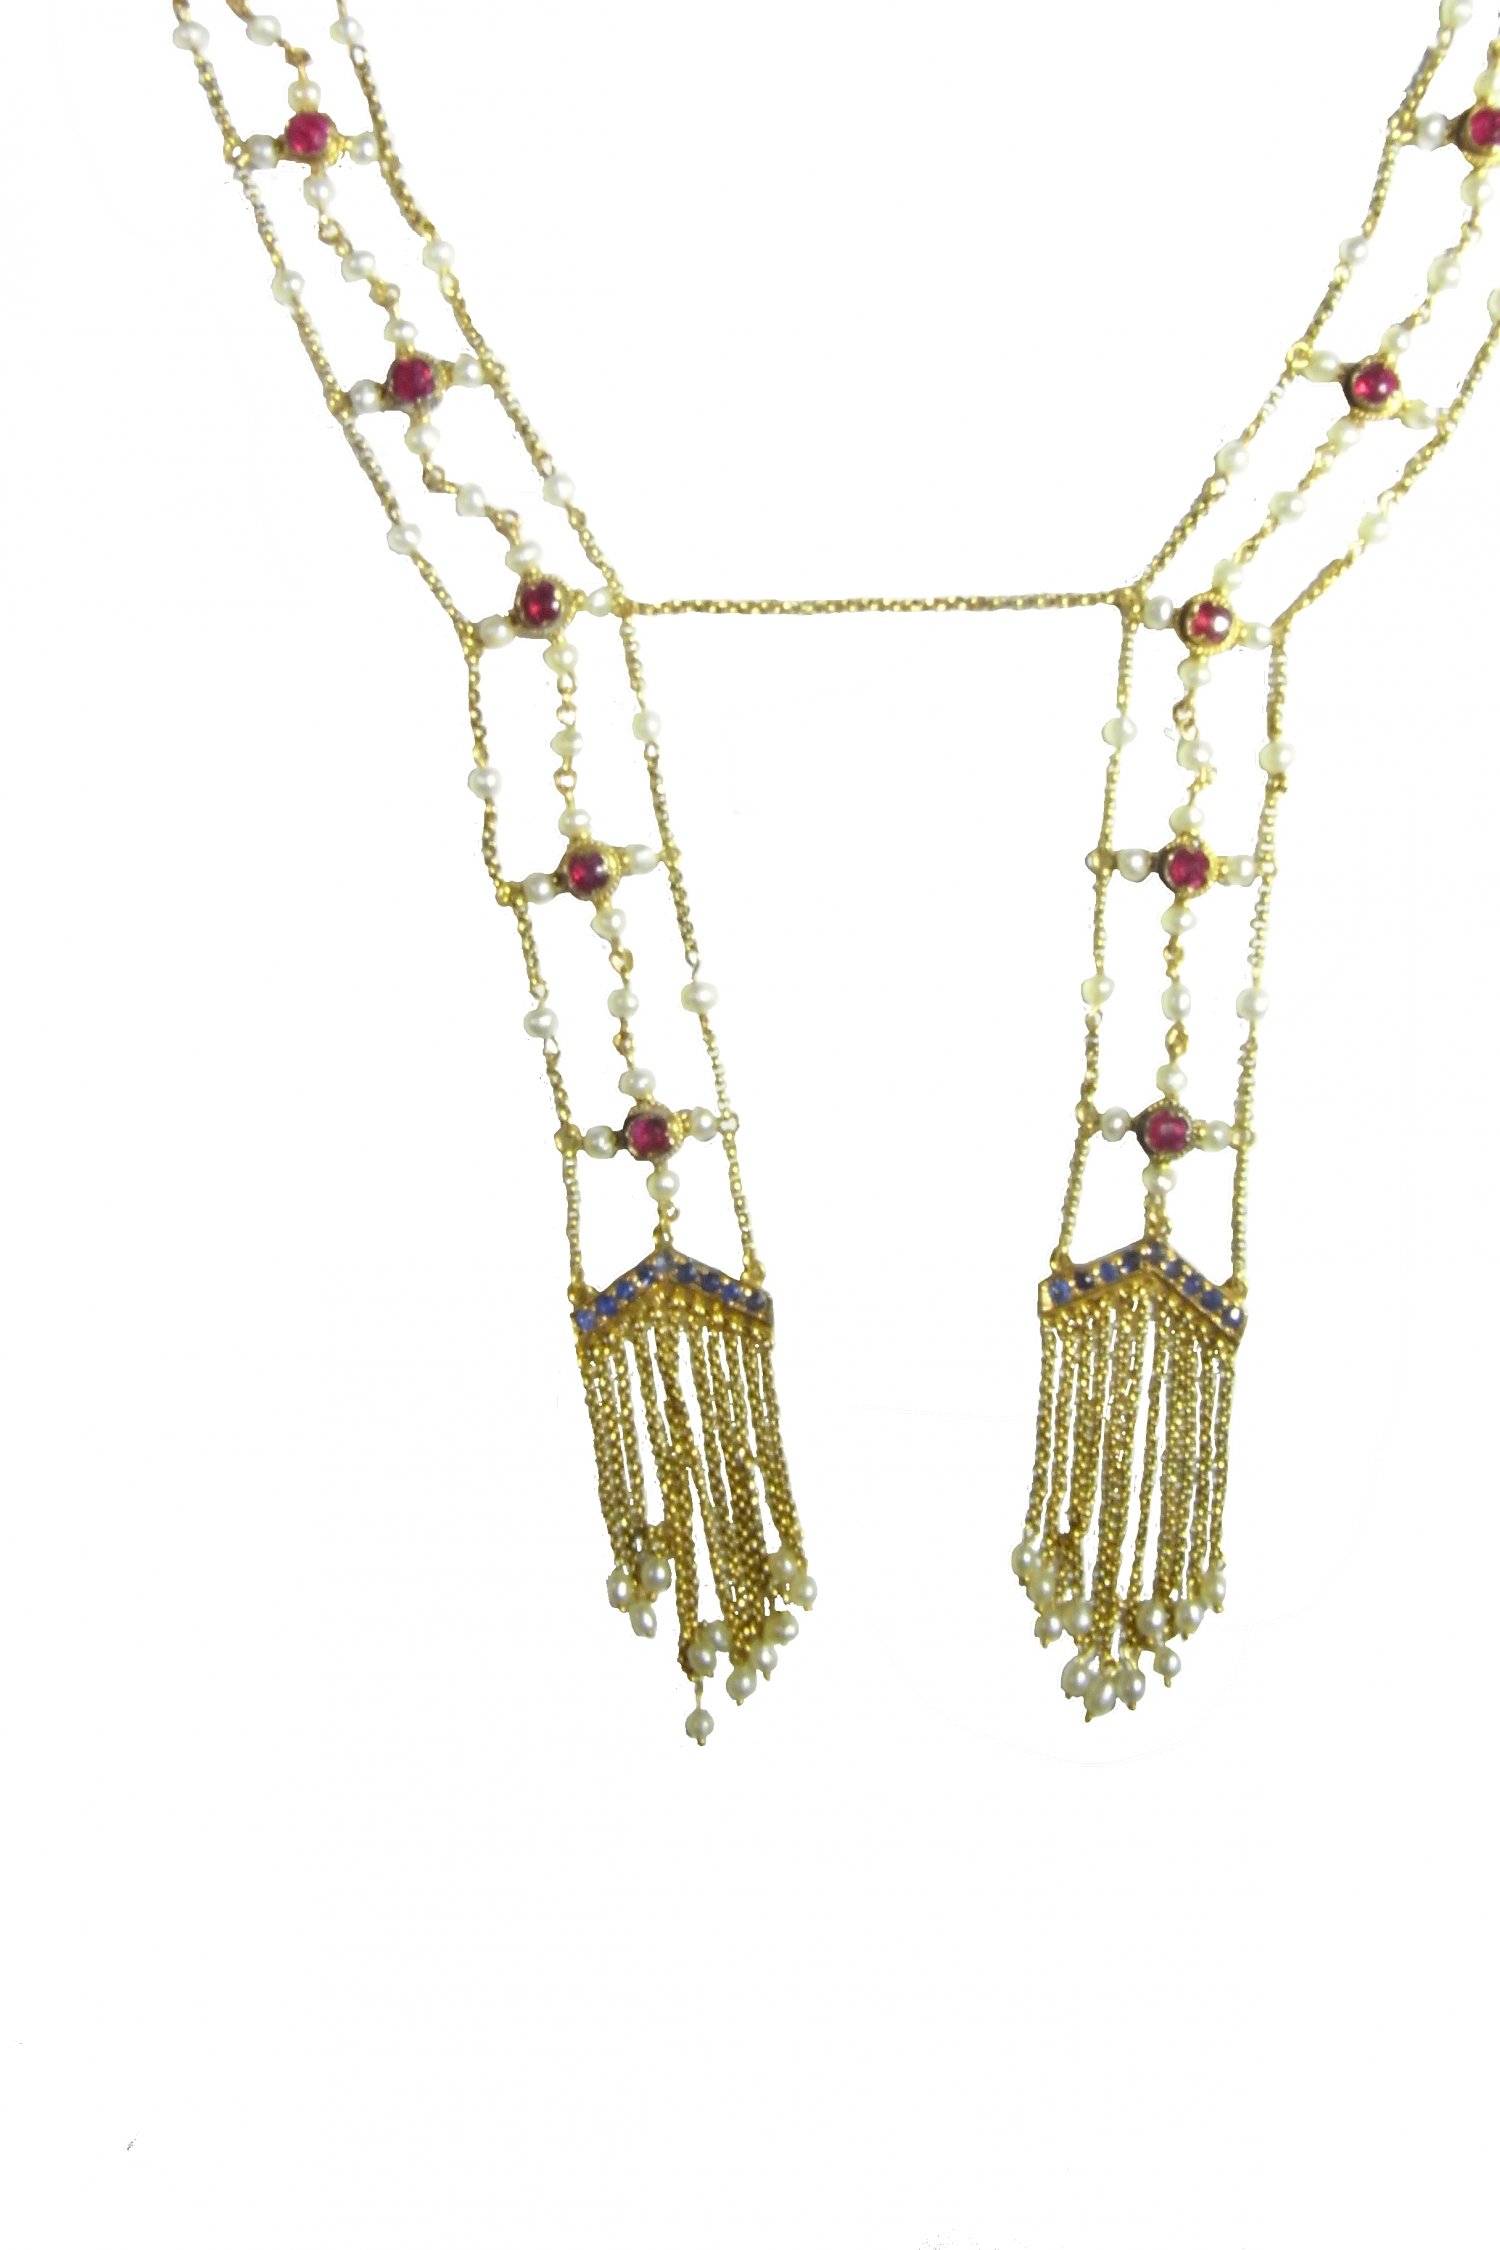 Victorian 1870s NO HEAT UNHEATED Ruby Sapphire Pearl 14K Yellow Gold Negligee Necklace 19th Century Festoon Red White and Blue Natural Pearls Antique